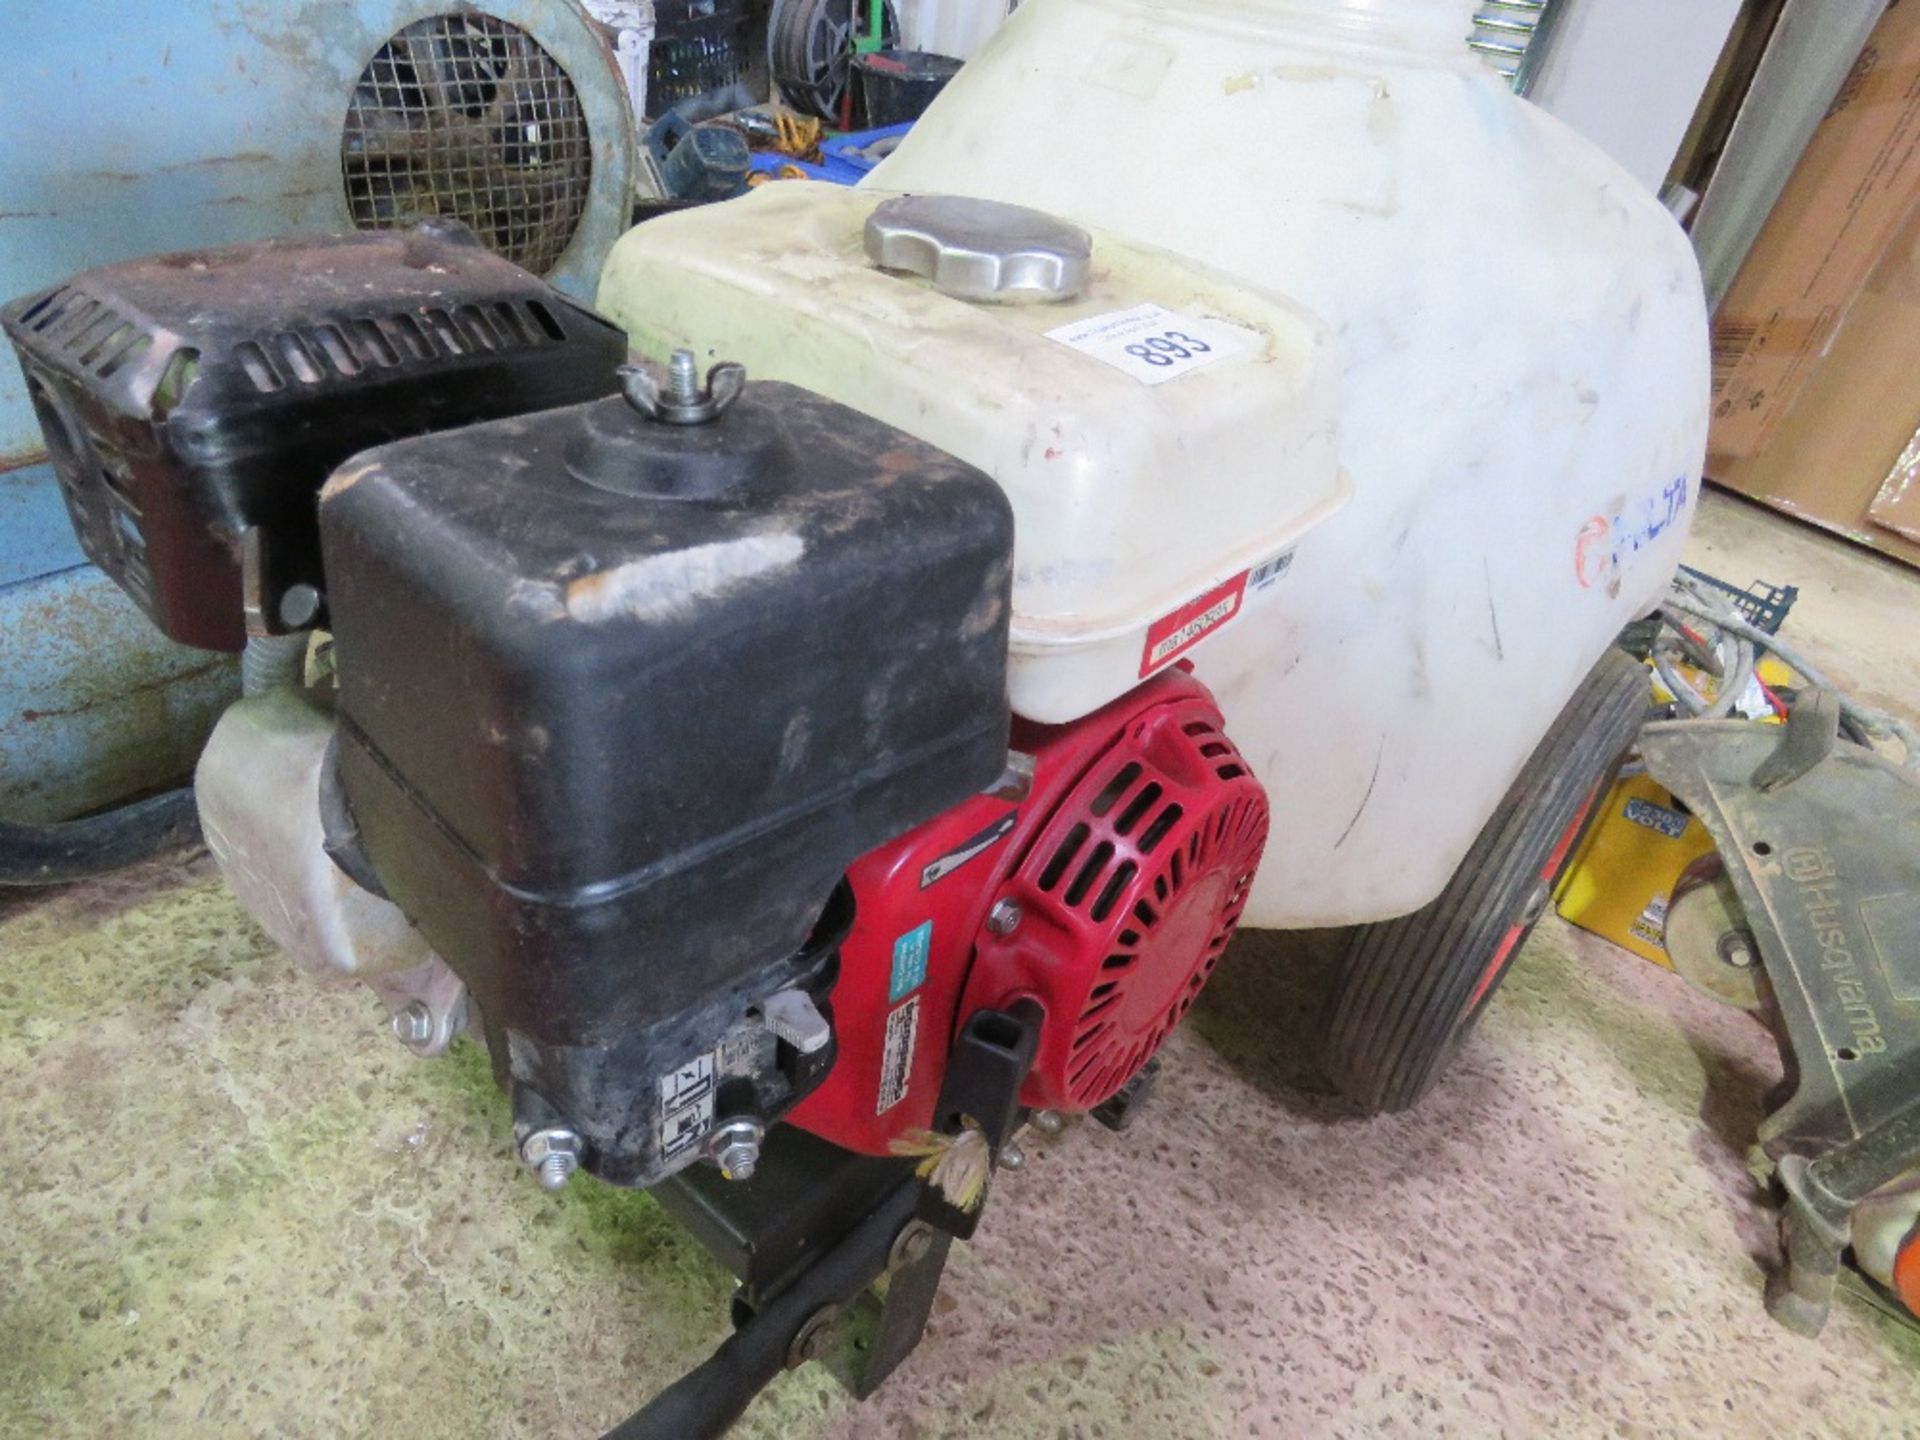 HILTA HONDA ENGINED PRESSURE WASHER BOWSER BARROW WITH EXTRA LONG LANCE.